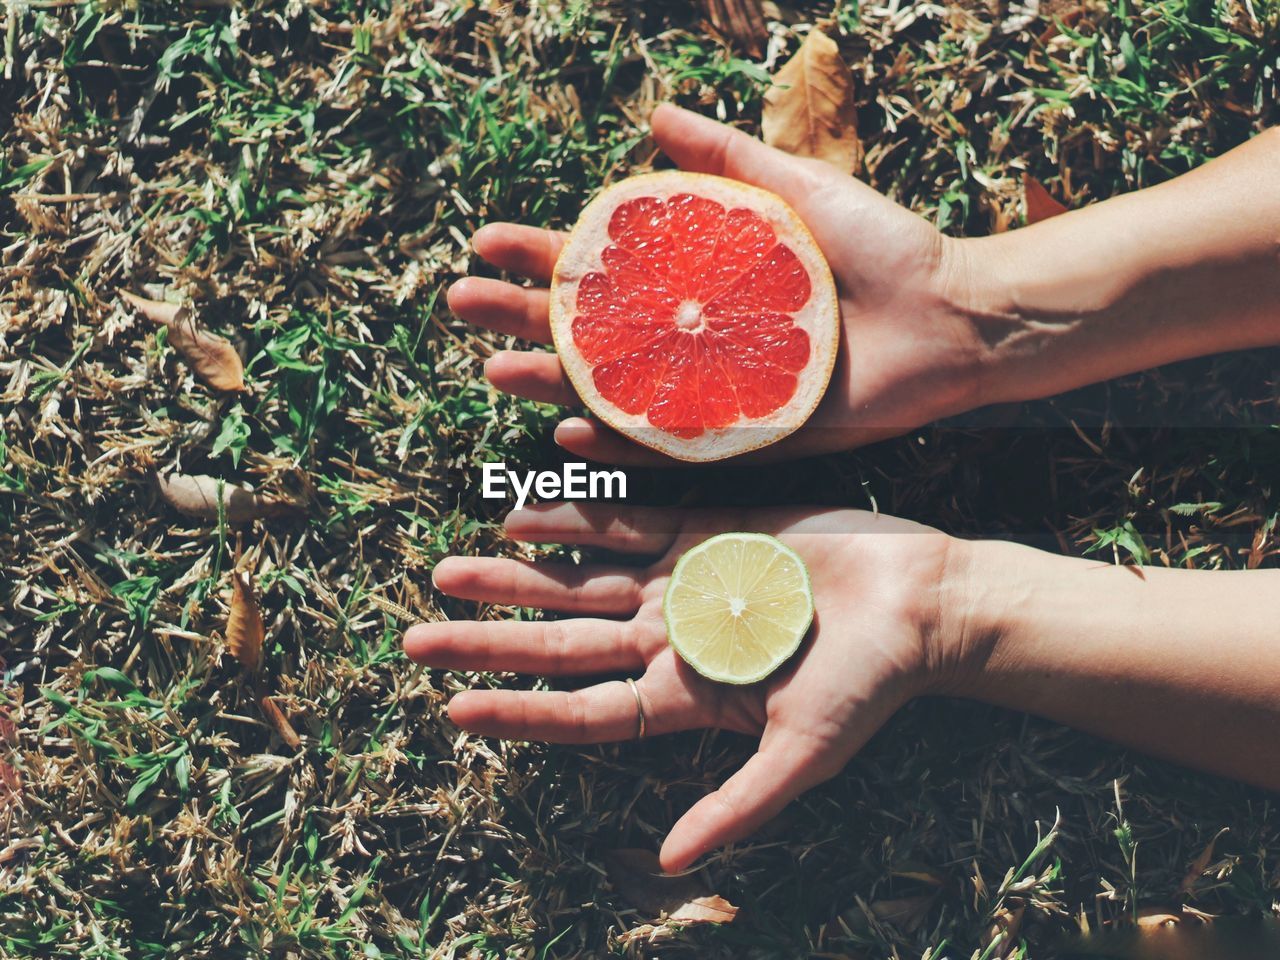 Cropped hands of woman with citrus fruits over grass